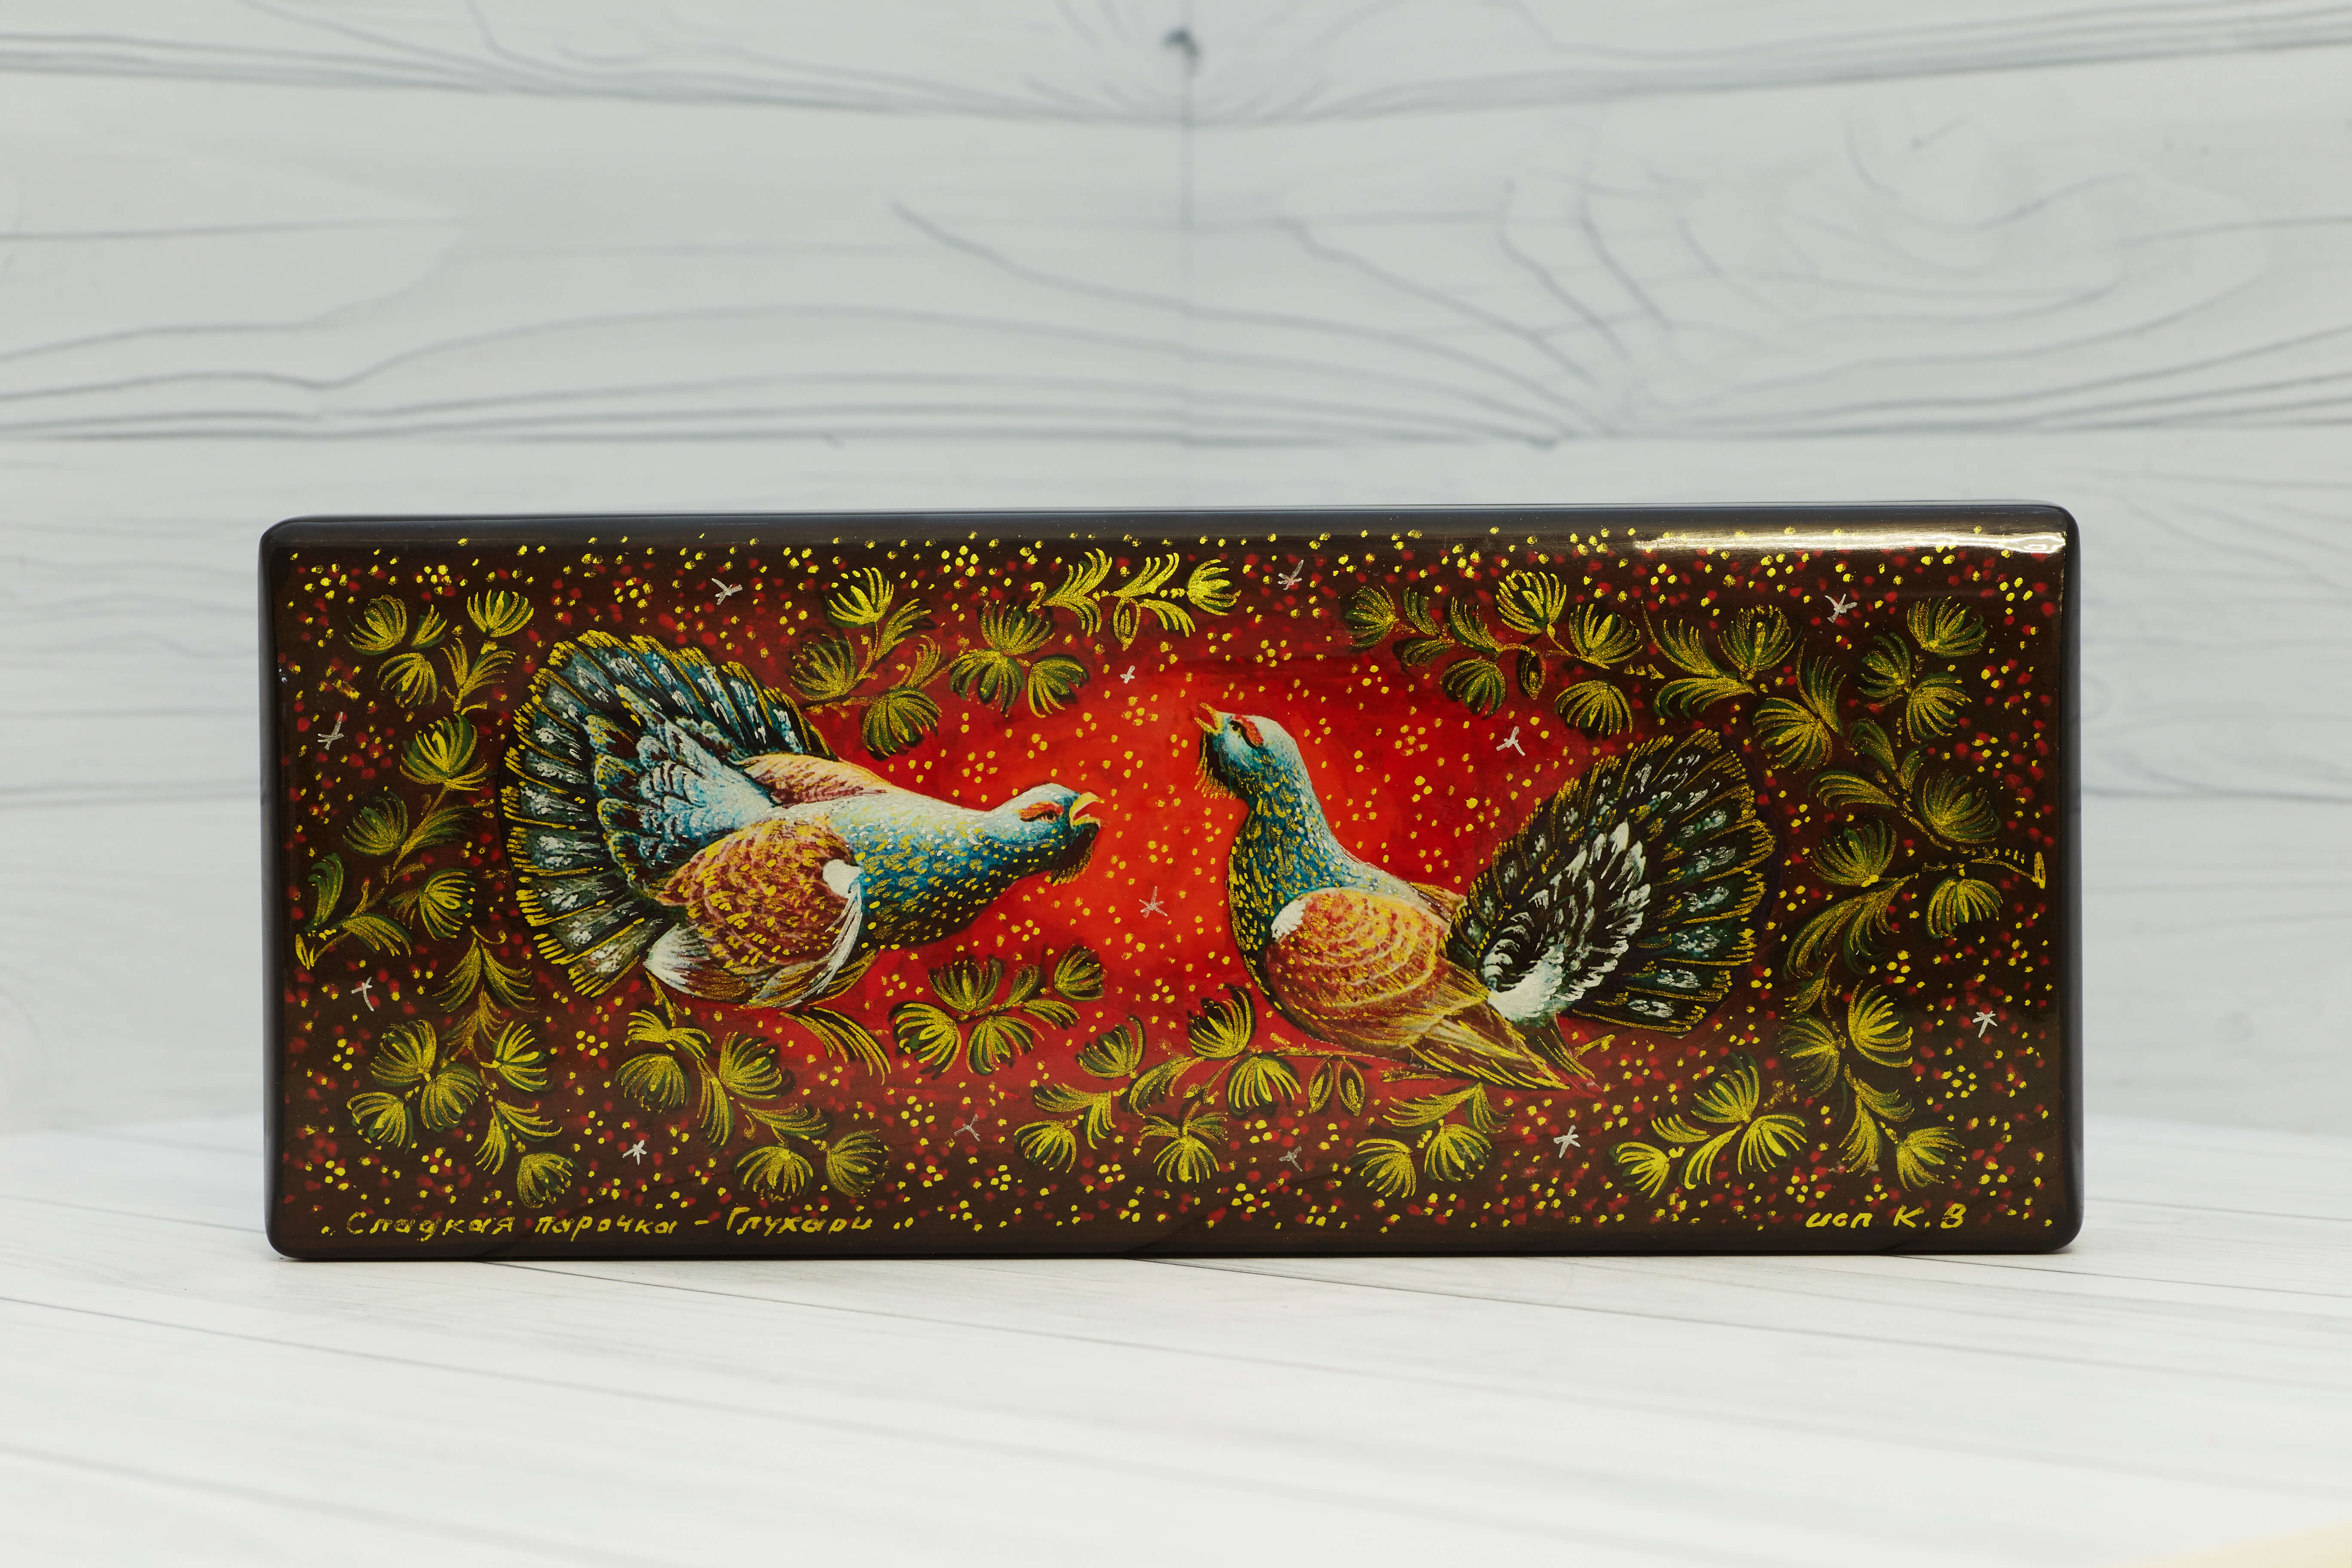 Sweet couple - Capercaillie  jewelry box 22x9x3.5 